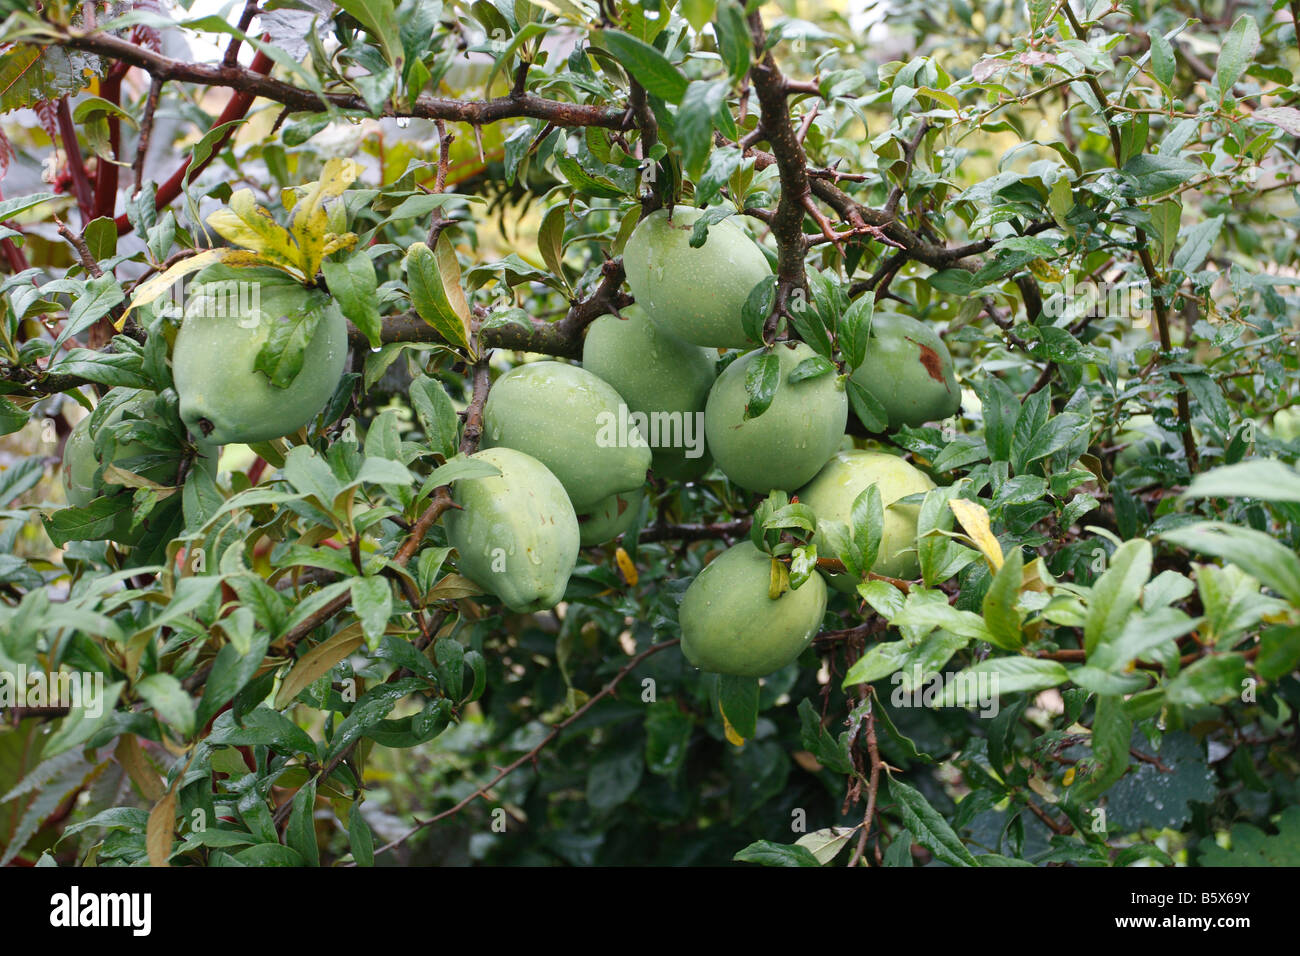 GIANT CHINESE QUINCE Chenomeles cathayensis FRUIT ON TREE Stock Photo ...